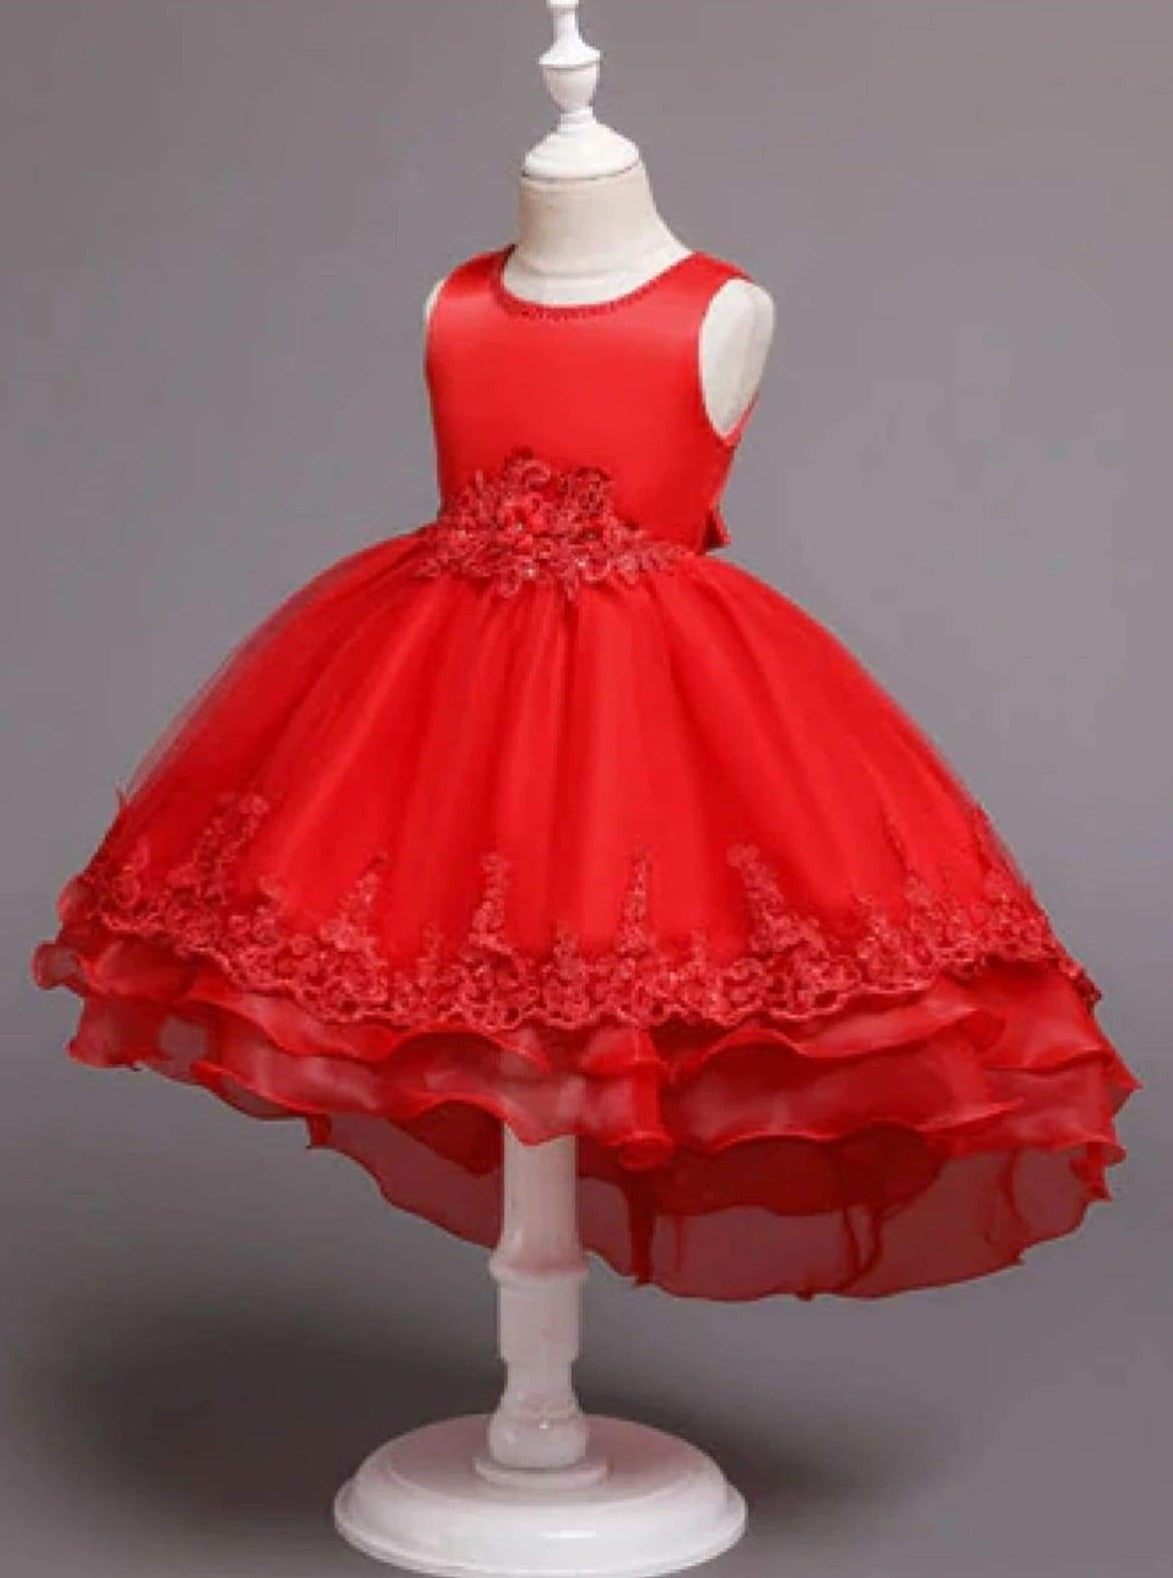 Girls Tiered Holiday Party Dress - Mia Belle Girls